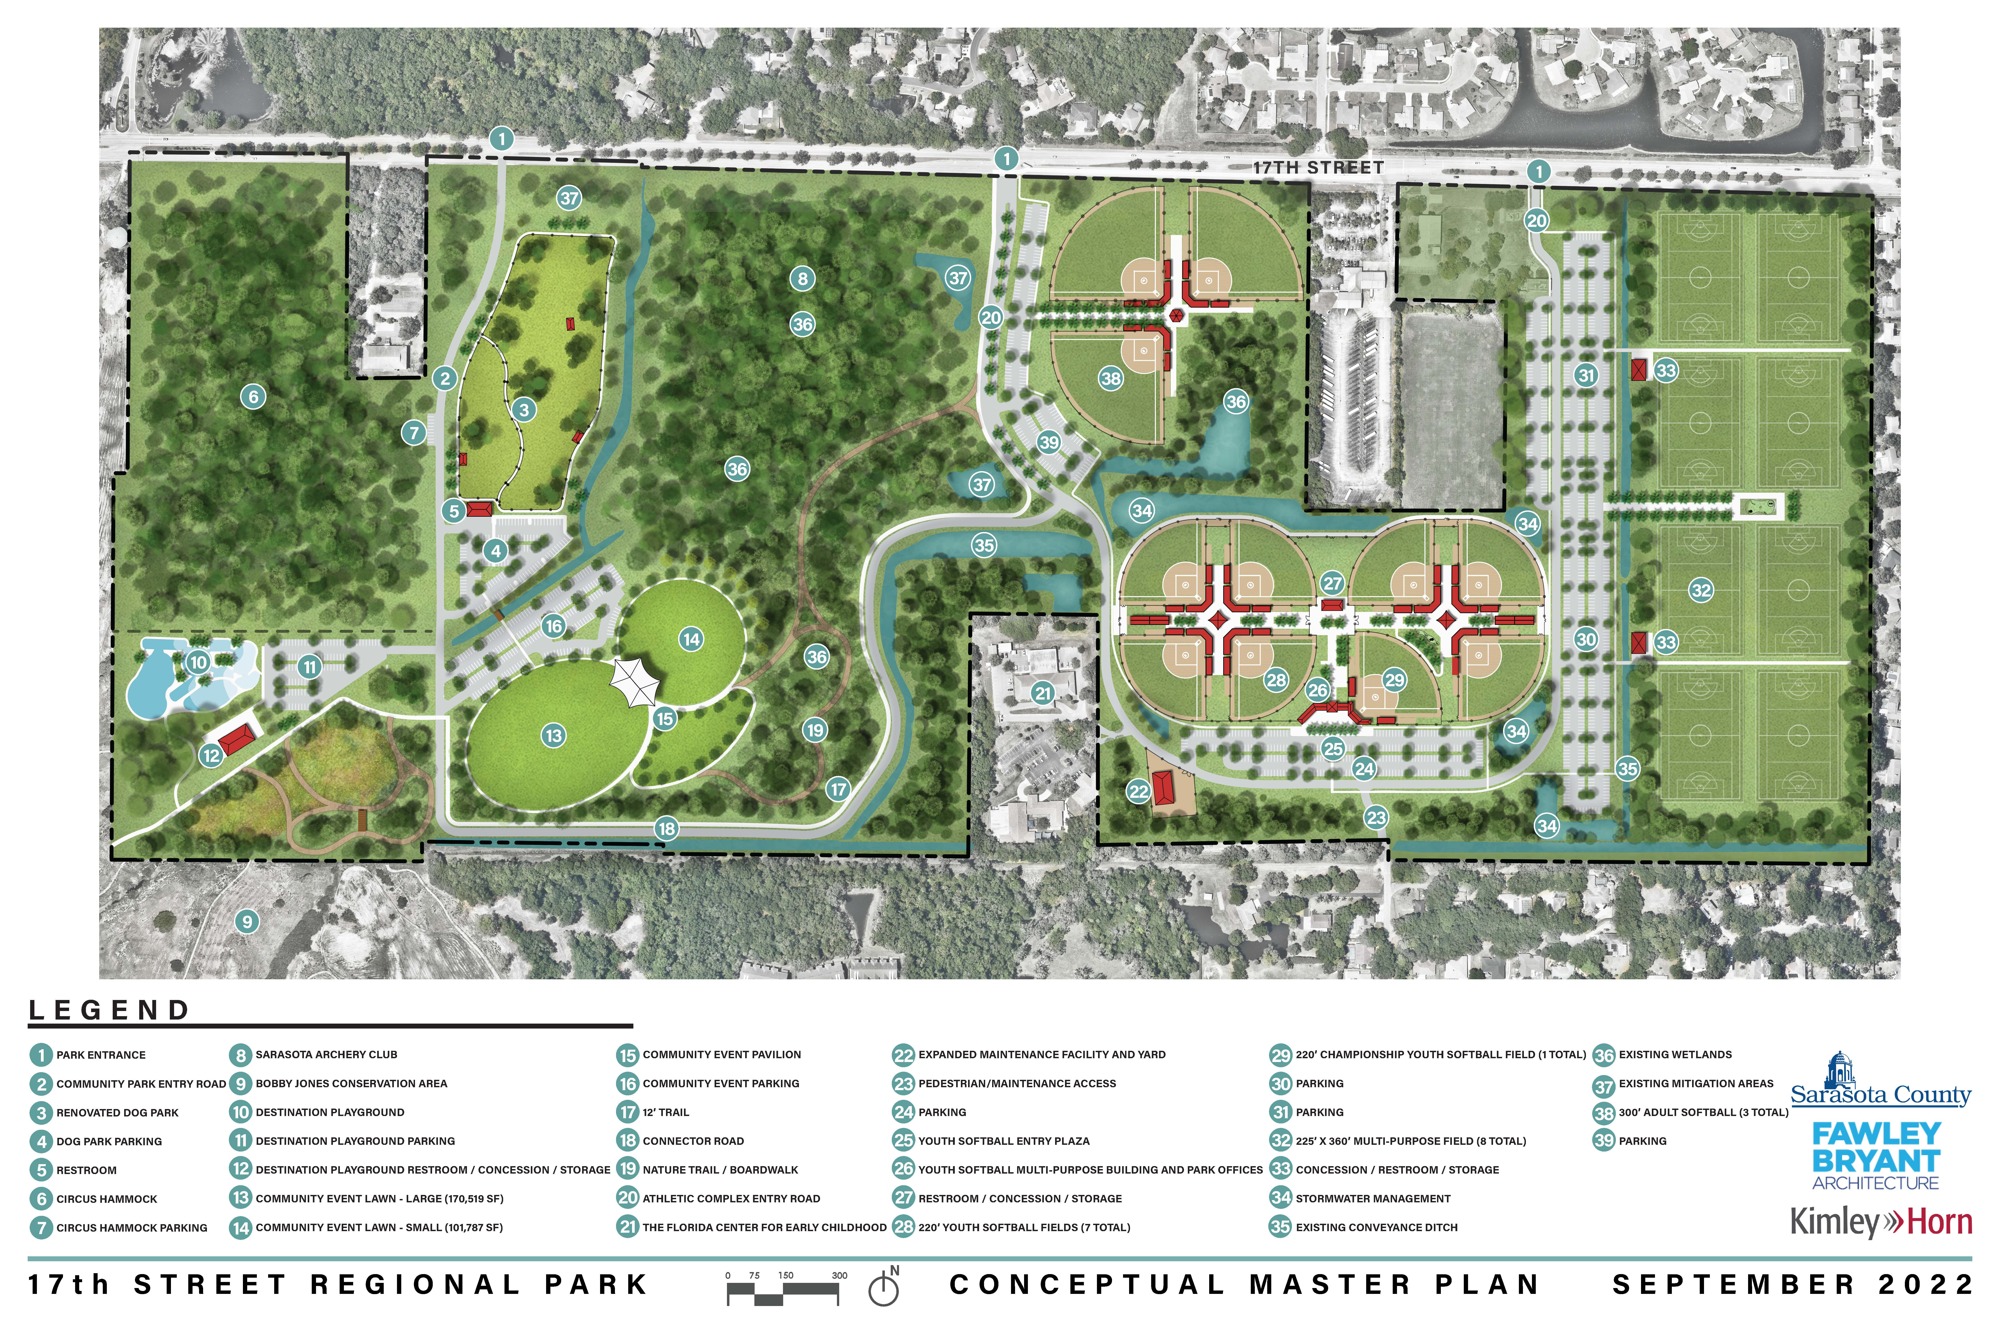 The master plan for 17th Street Park.